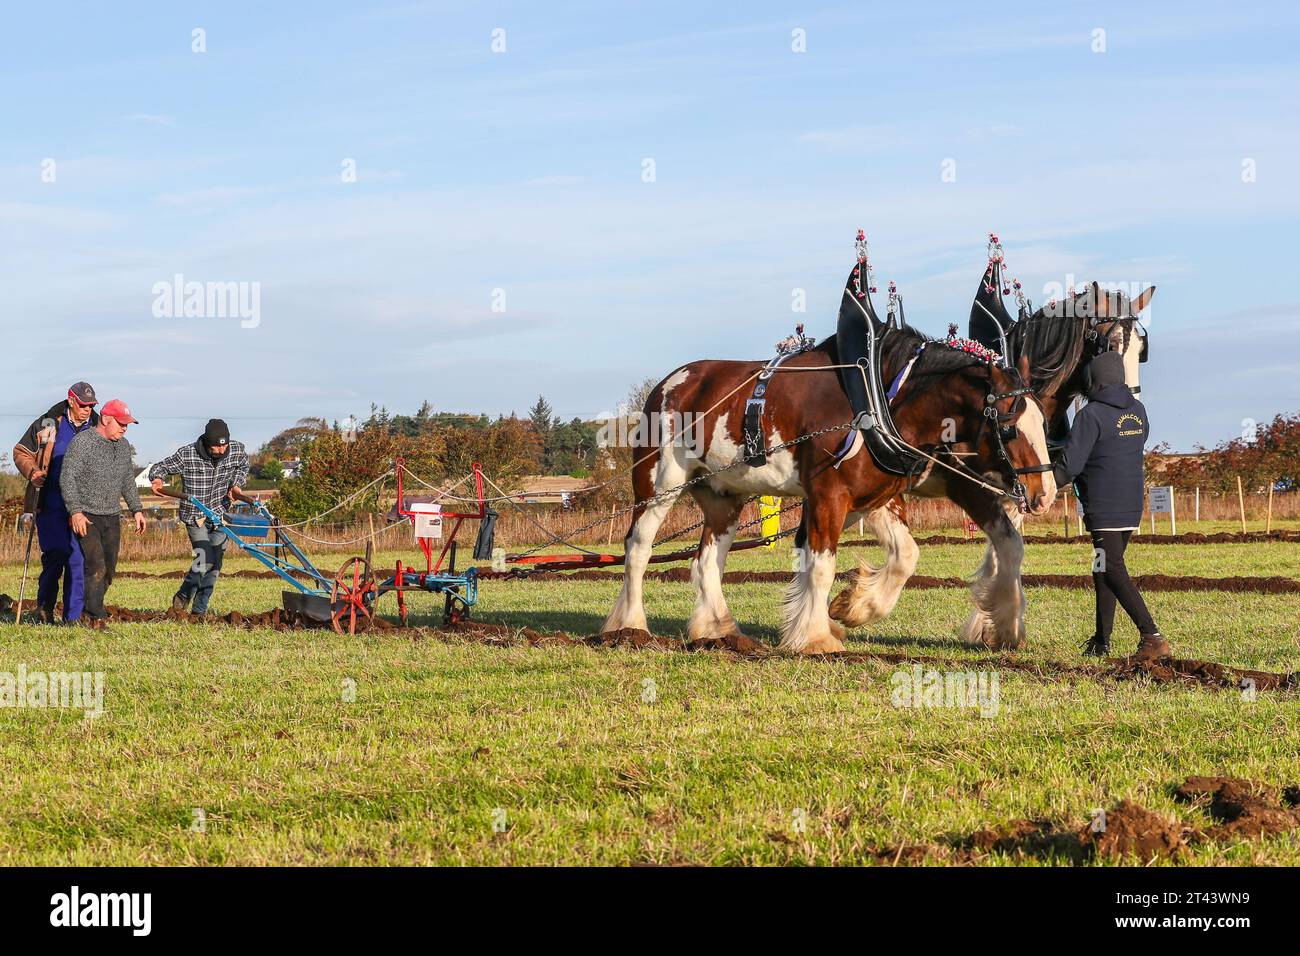 28 Oct 23, Prestwick, UK. The 59th Scottish Ploughing Championships, held over more than 200 acres of Montonhill Farm, near Prestwick, Ayrshire, Scotland, UK, attracted more than 100 International entrants, to classes including Shire and Clydesdale horses, European classic and vintage tractors and ploughs, as well as modern tractors with ploughs. The winners will get qualification points and may go on to take part in the world ploughing championships. Credit: Findlay/Alamy Live News Stock Photo